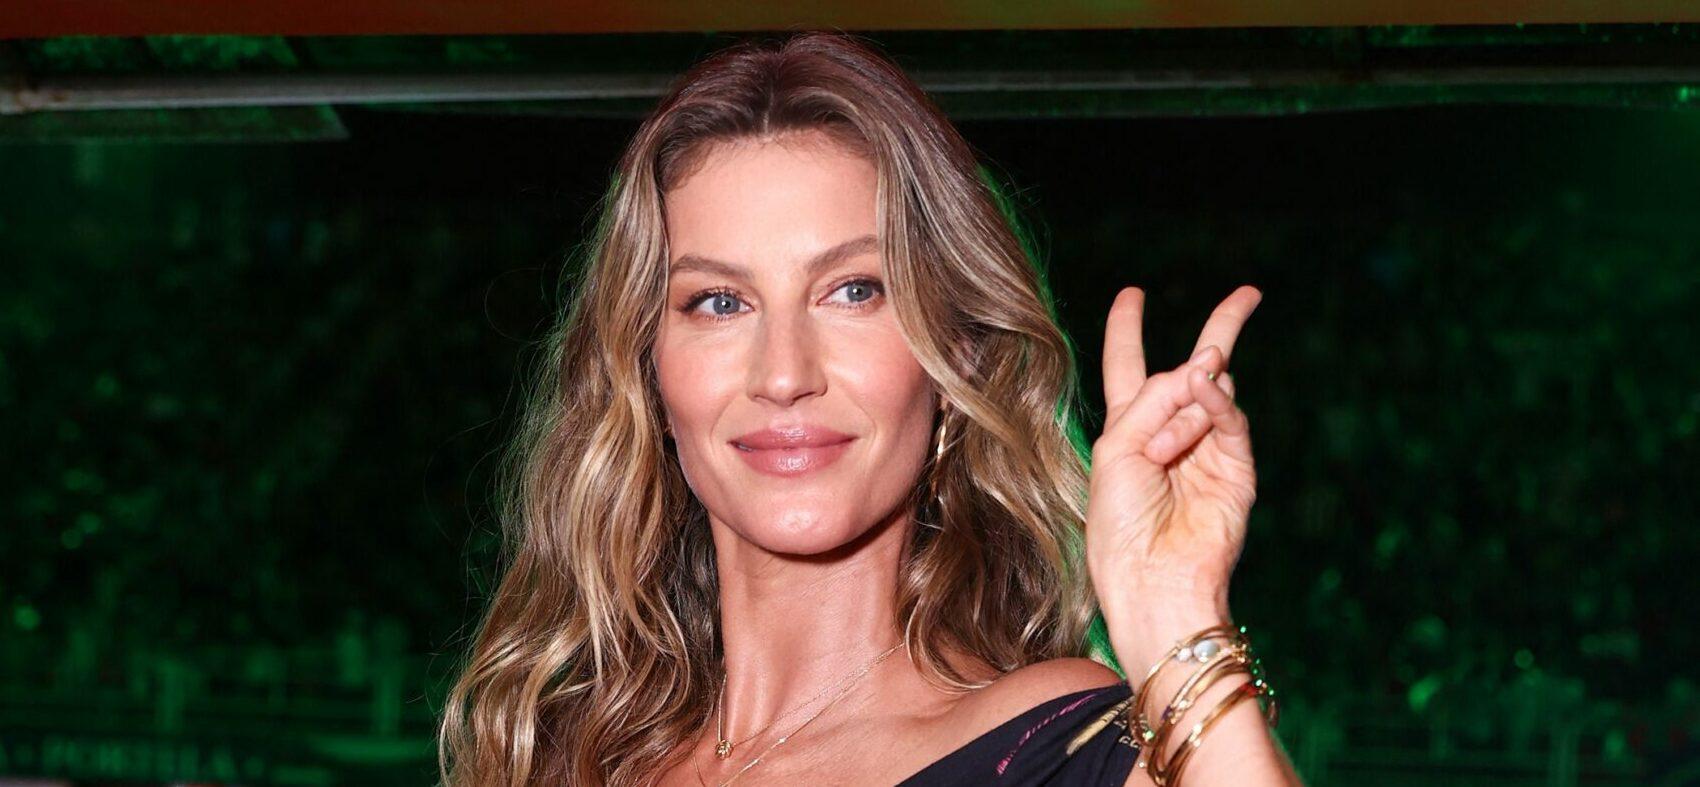 Gisele Bündchen Is Full Of Life And All Smiles In Wholesome New Video: ‘Every Day Is A Gift!’